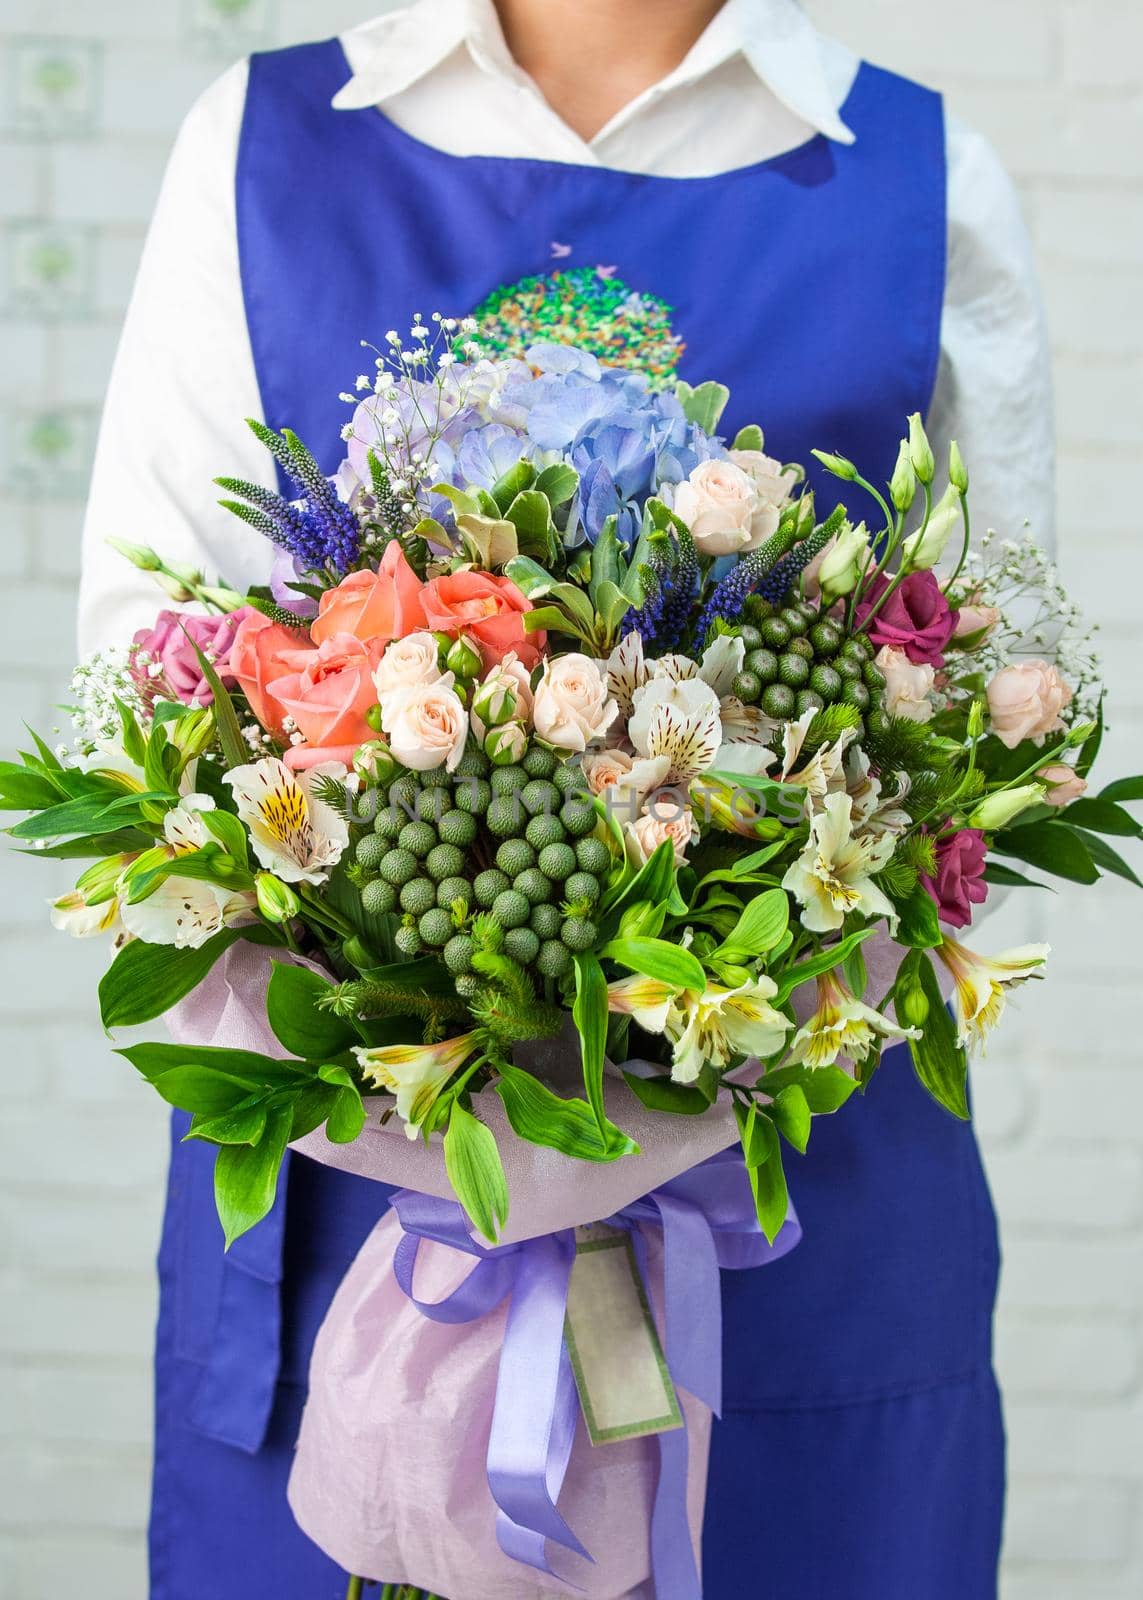 Woman holding a beautiful bouquet with roses, lisianthus, alstroemeria, and hortensia by A_Karim